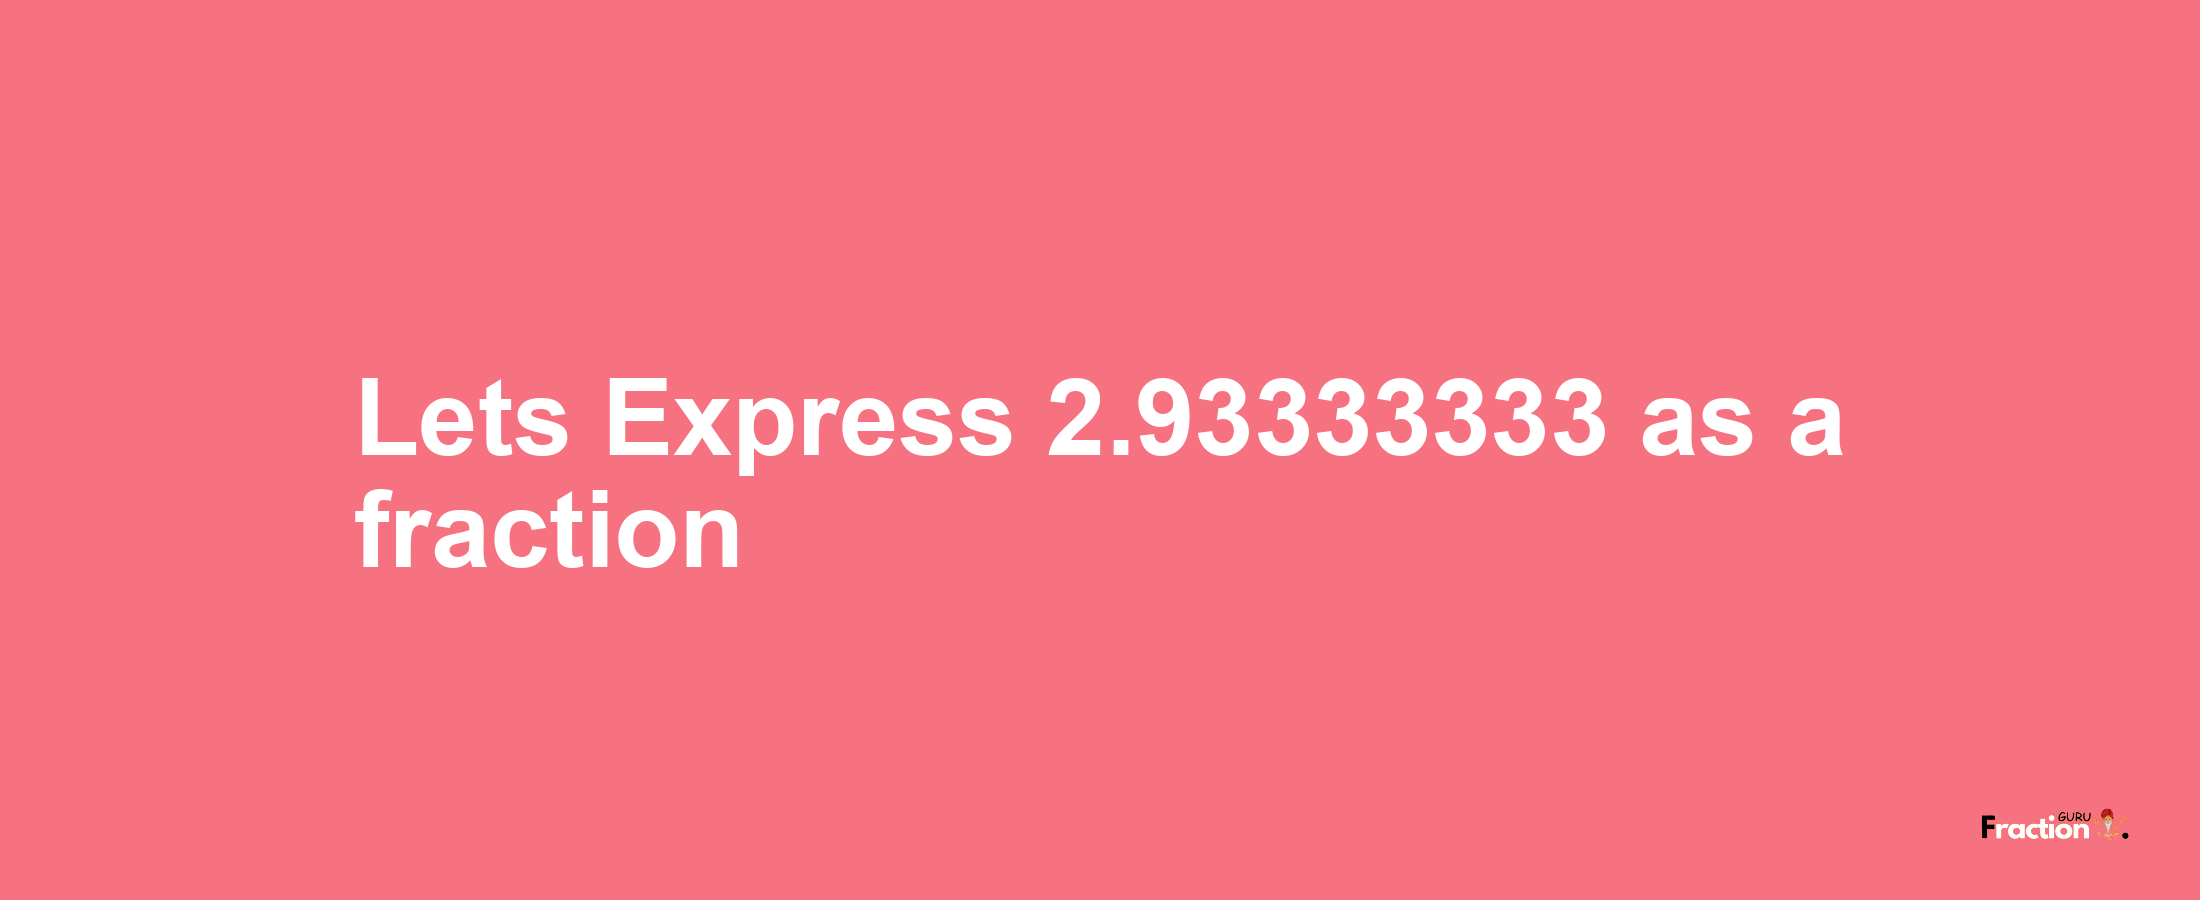 Lets Express 2.93333333 as afraction